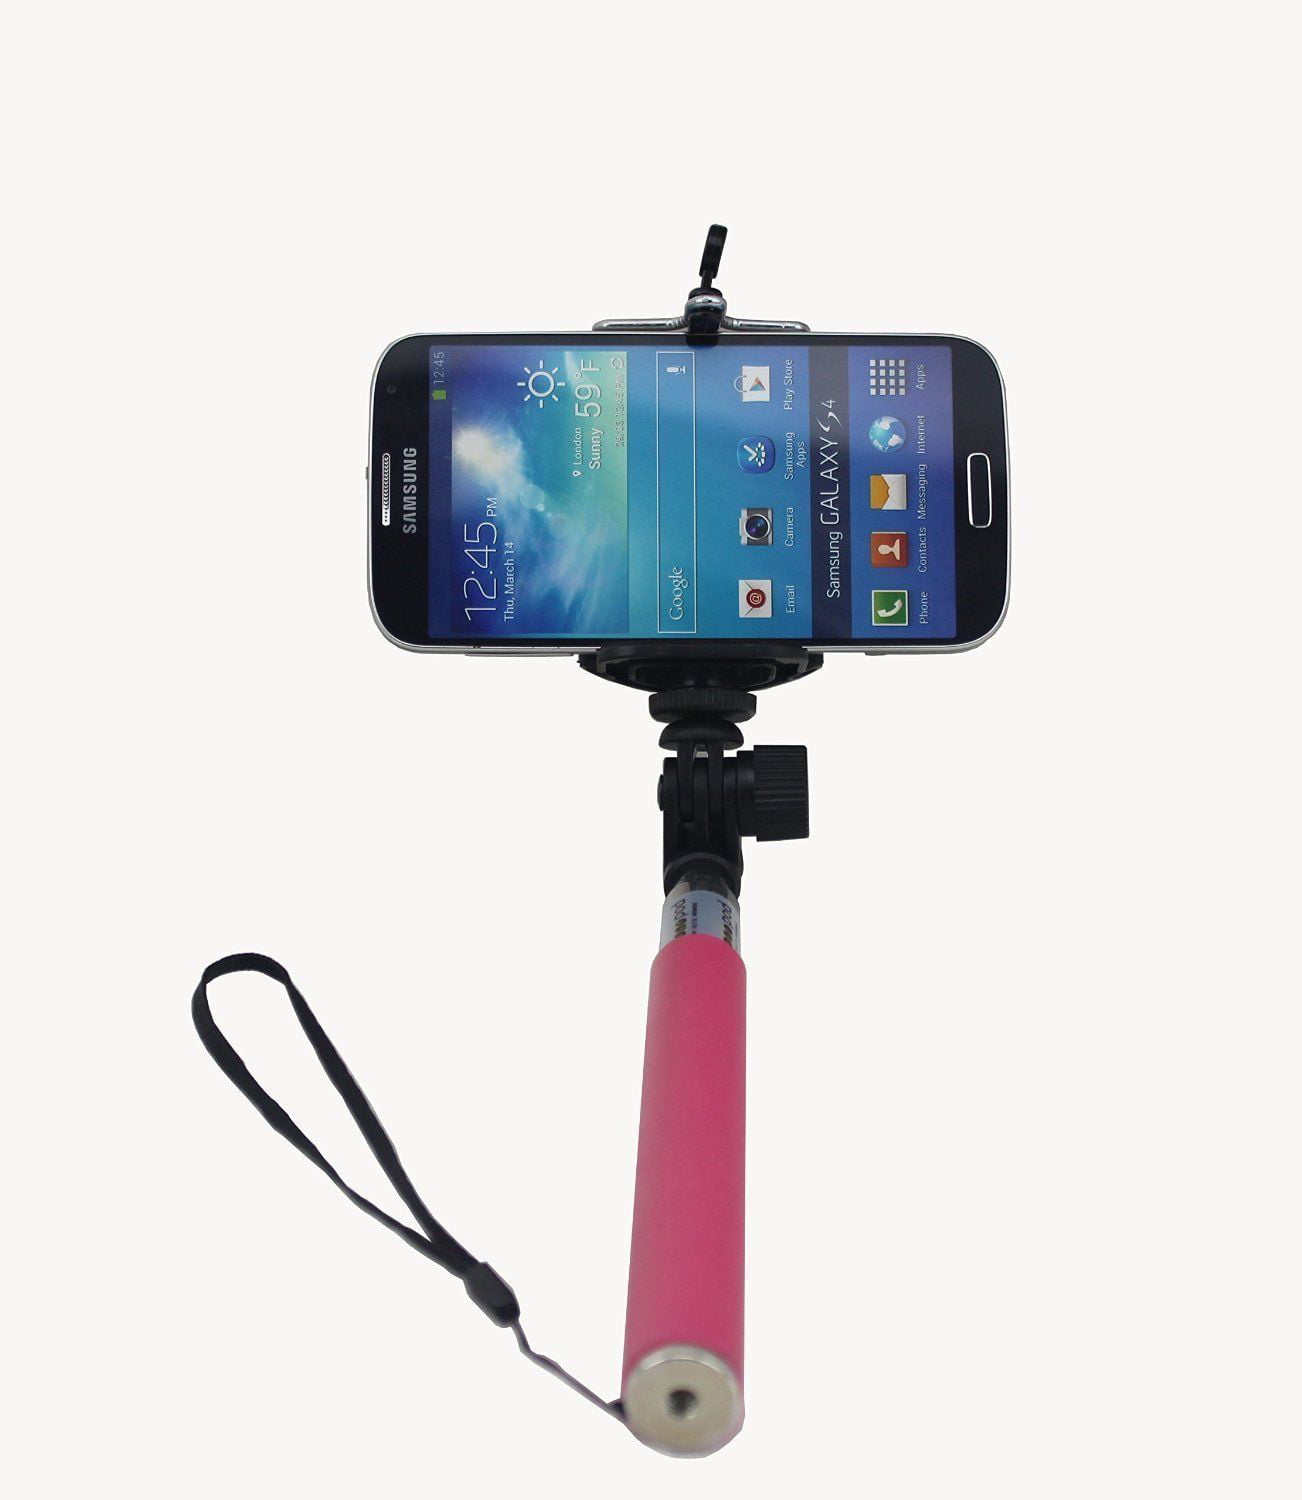 Extendable Handheld Selfie Stick MONOPOD - 7.87" to 38.19" Height - 1.10 lb Load Capacity For iPhone X iPhone 8 8 Plus 7 7Plus 6 6s Plus SE 5 5s 5c Samsung Galaxy S8 S8 plus - Pink